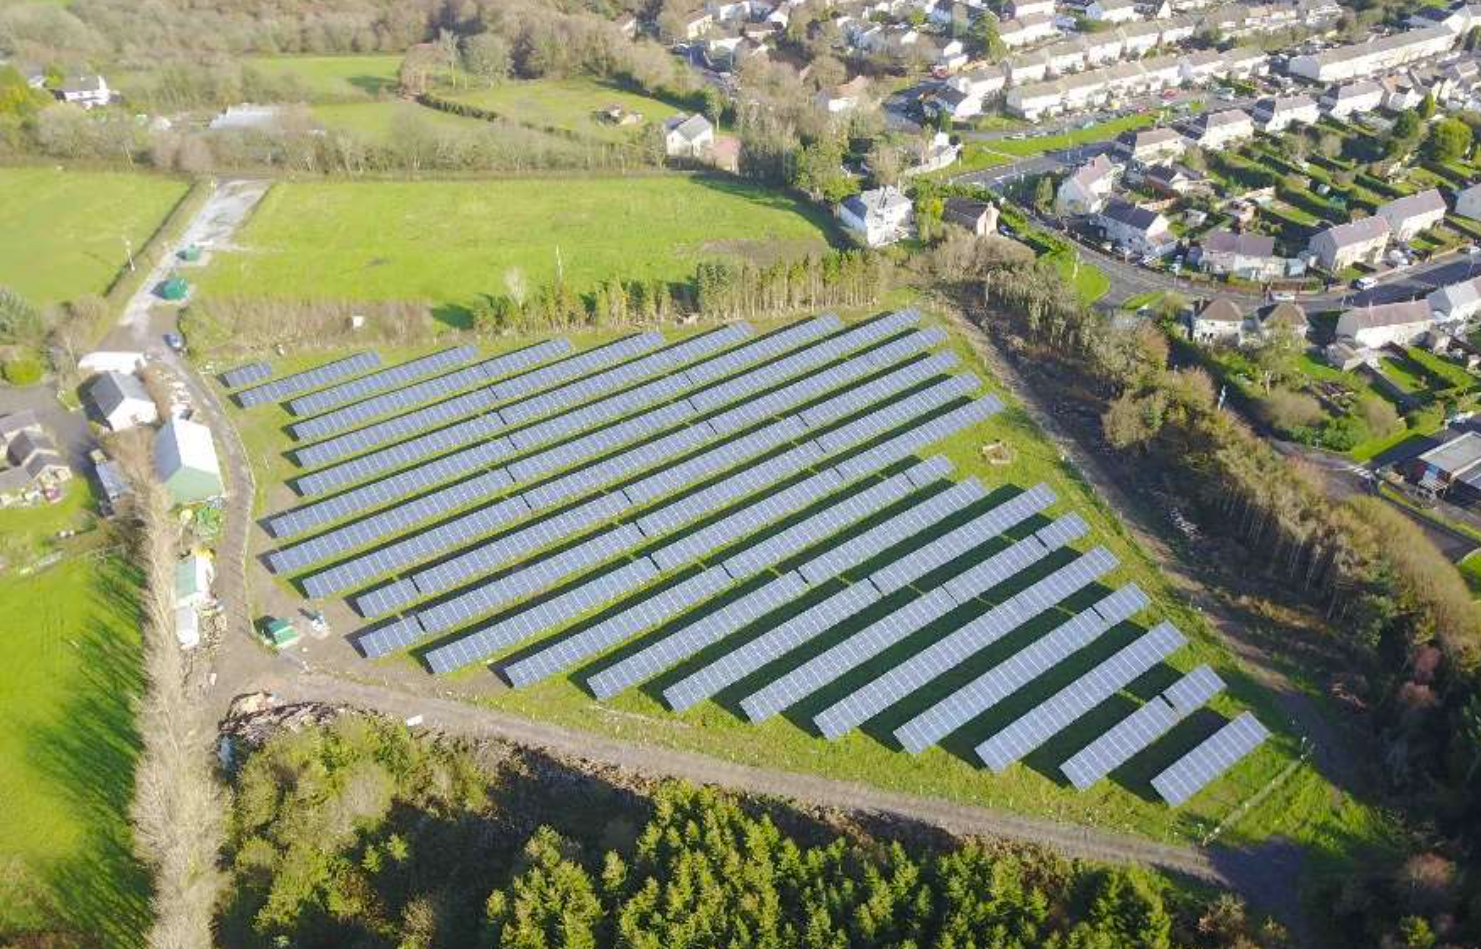 Gower Electric Co's Solar Farm in Dunvant